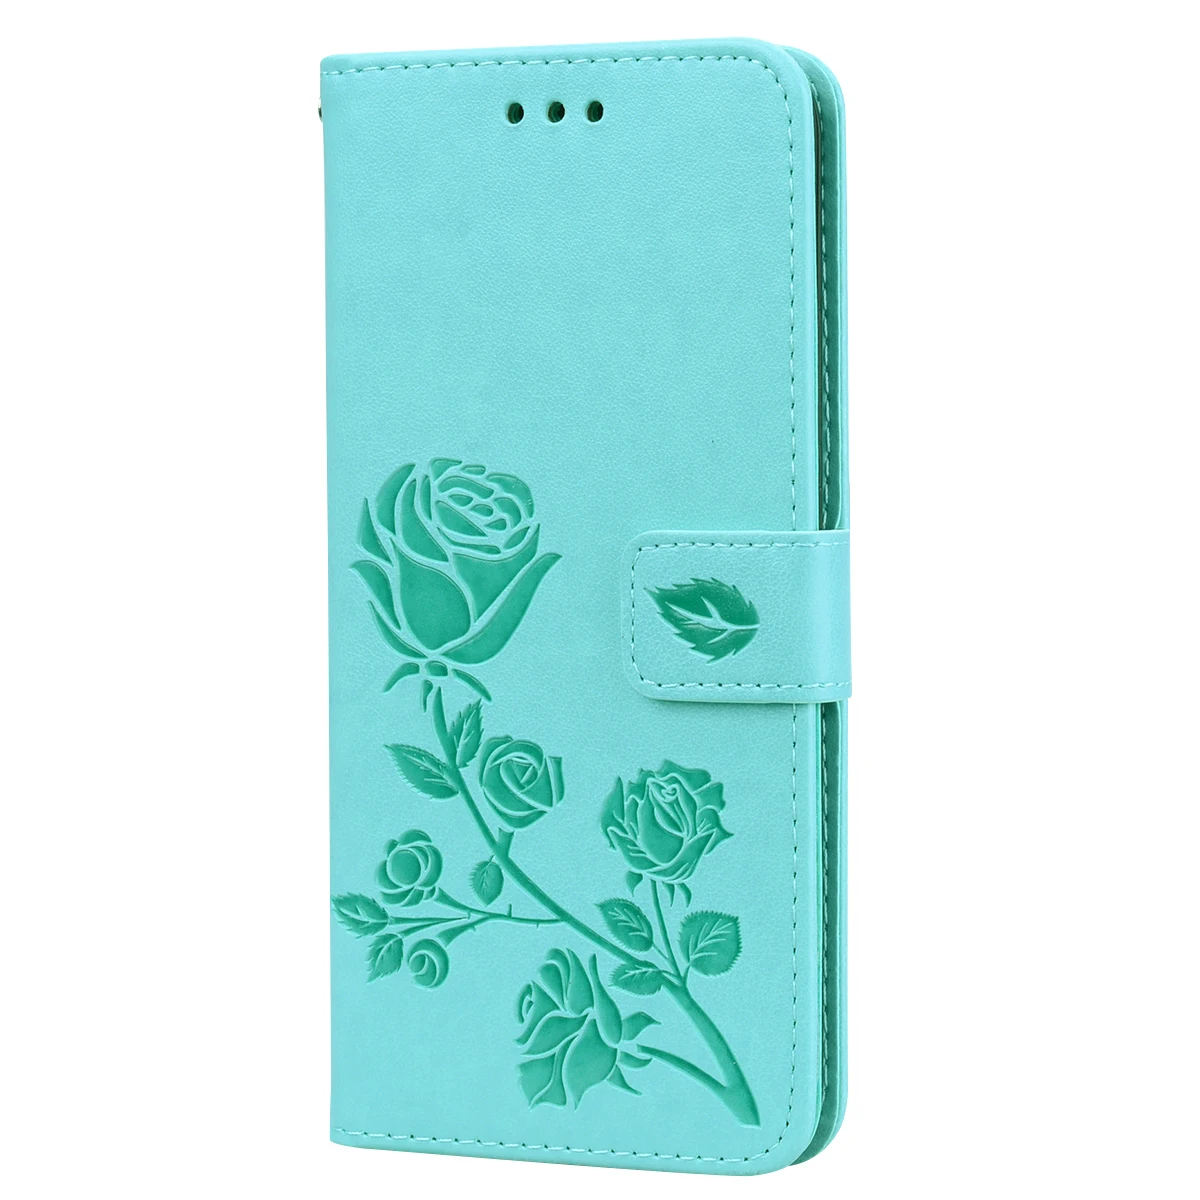 UMIDIGI Power Case Protection Stand Style PU Leather Flip Silicone Back Cover For UMIDIGI Power Mobile Phone Wallet Capa 6.3" - Цвет: MGH Green